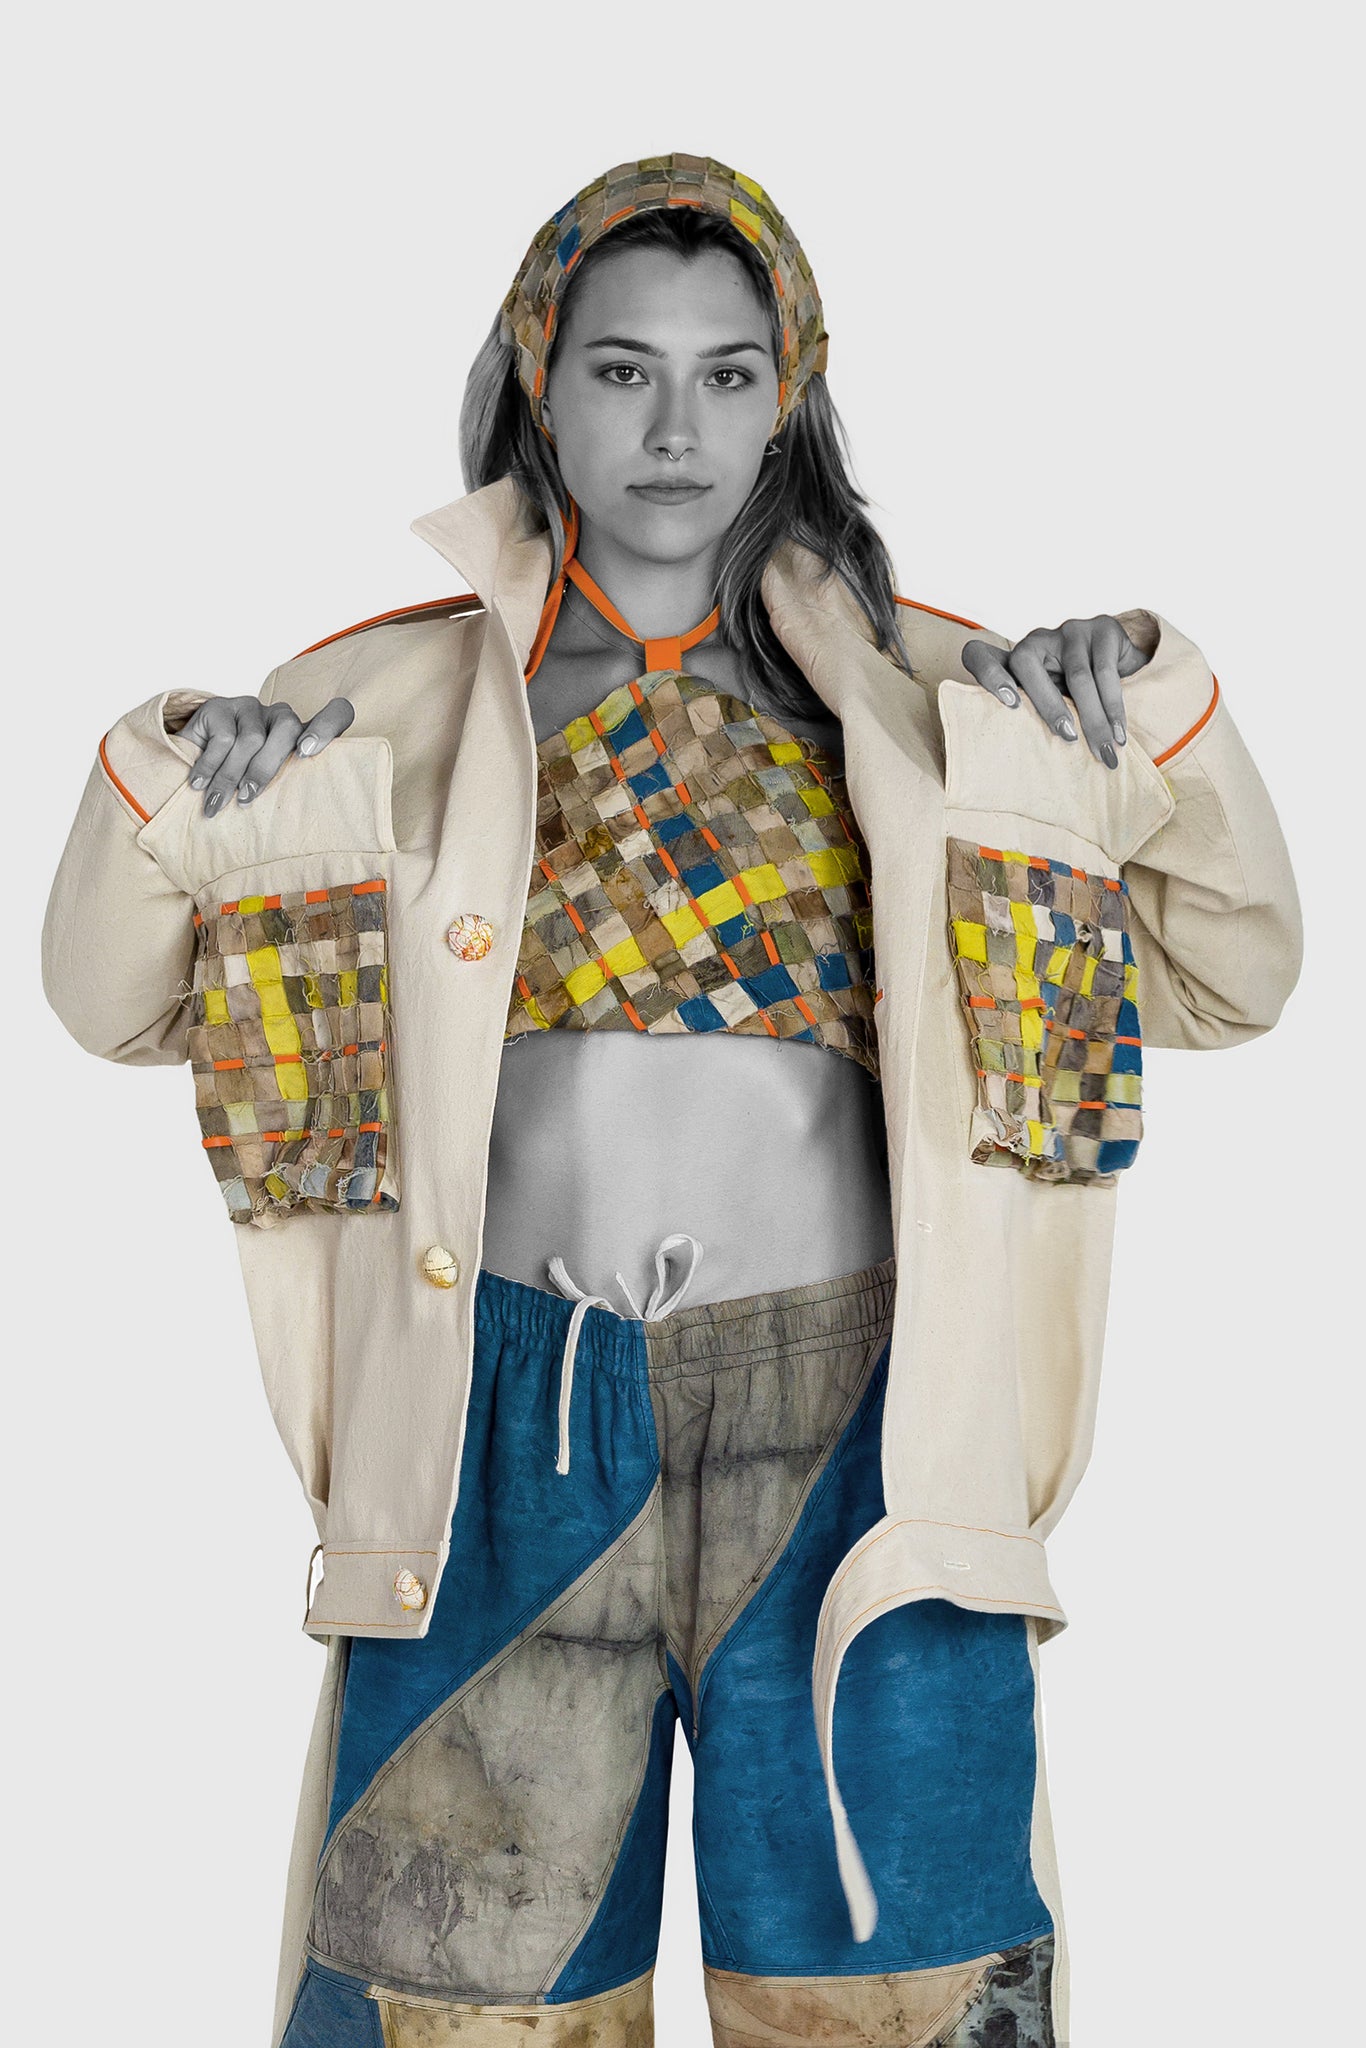 Ruxandra, outfit of the day, spring summer look, jumper jacket, woven bustier top, with cool textured feel, grungy elegant avantgarde feel, earth colors and yellow oranges, sunny outfit